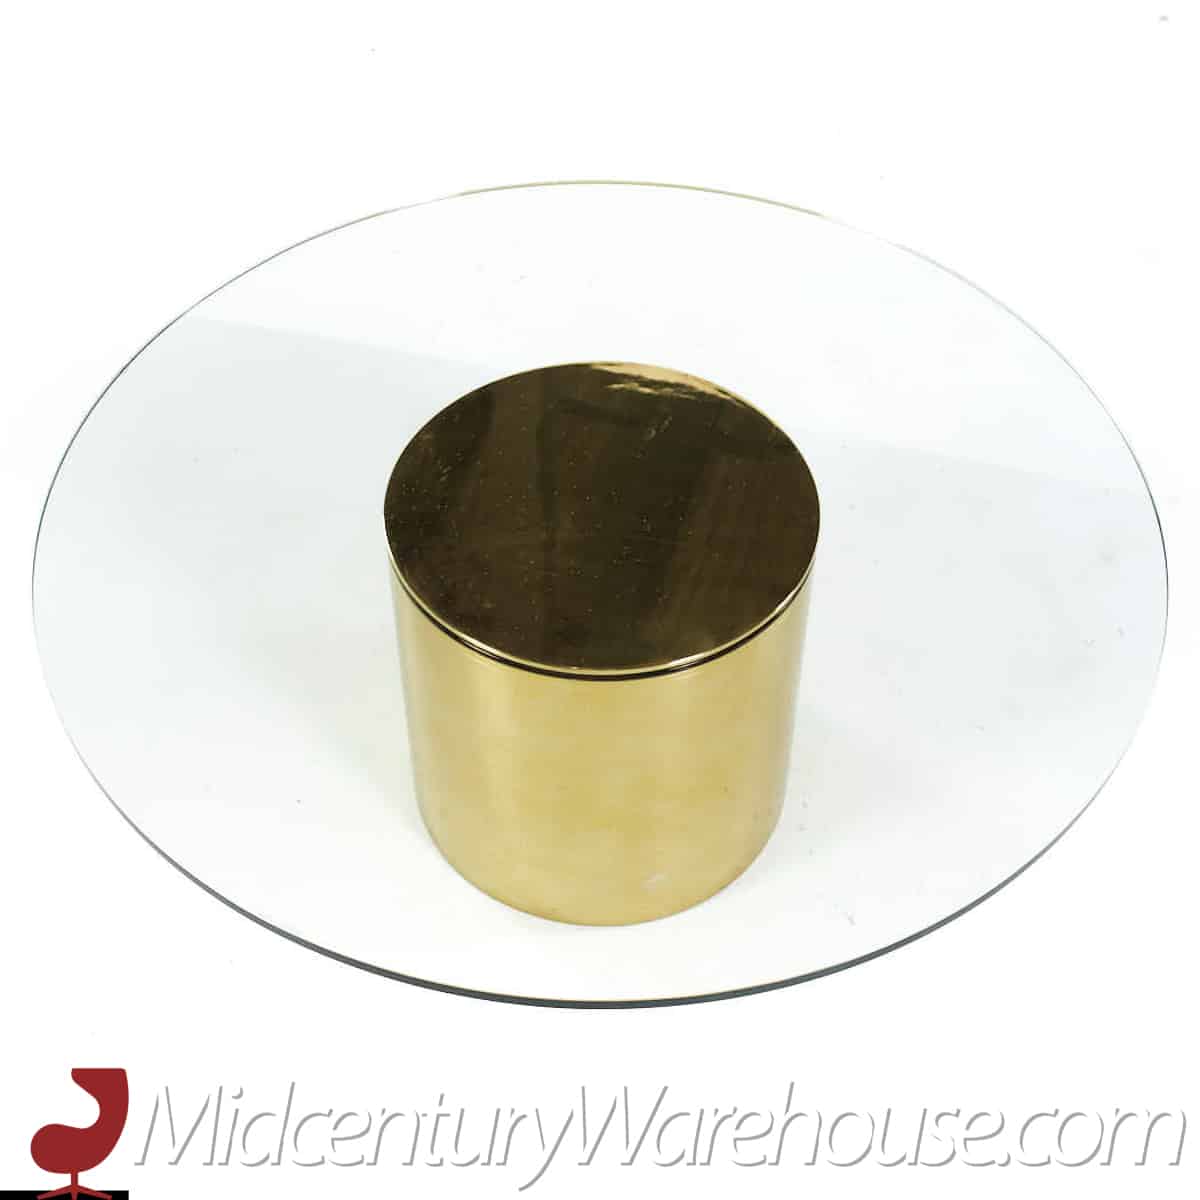 Paul Mayén Mid Century Round Brass Coffee Table with Glass Top